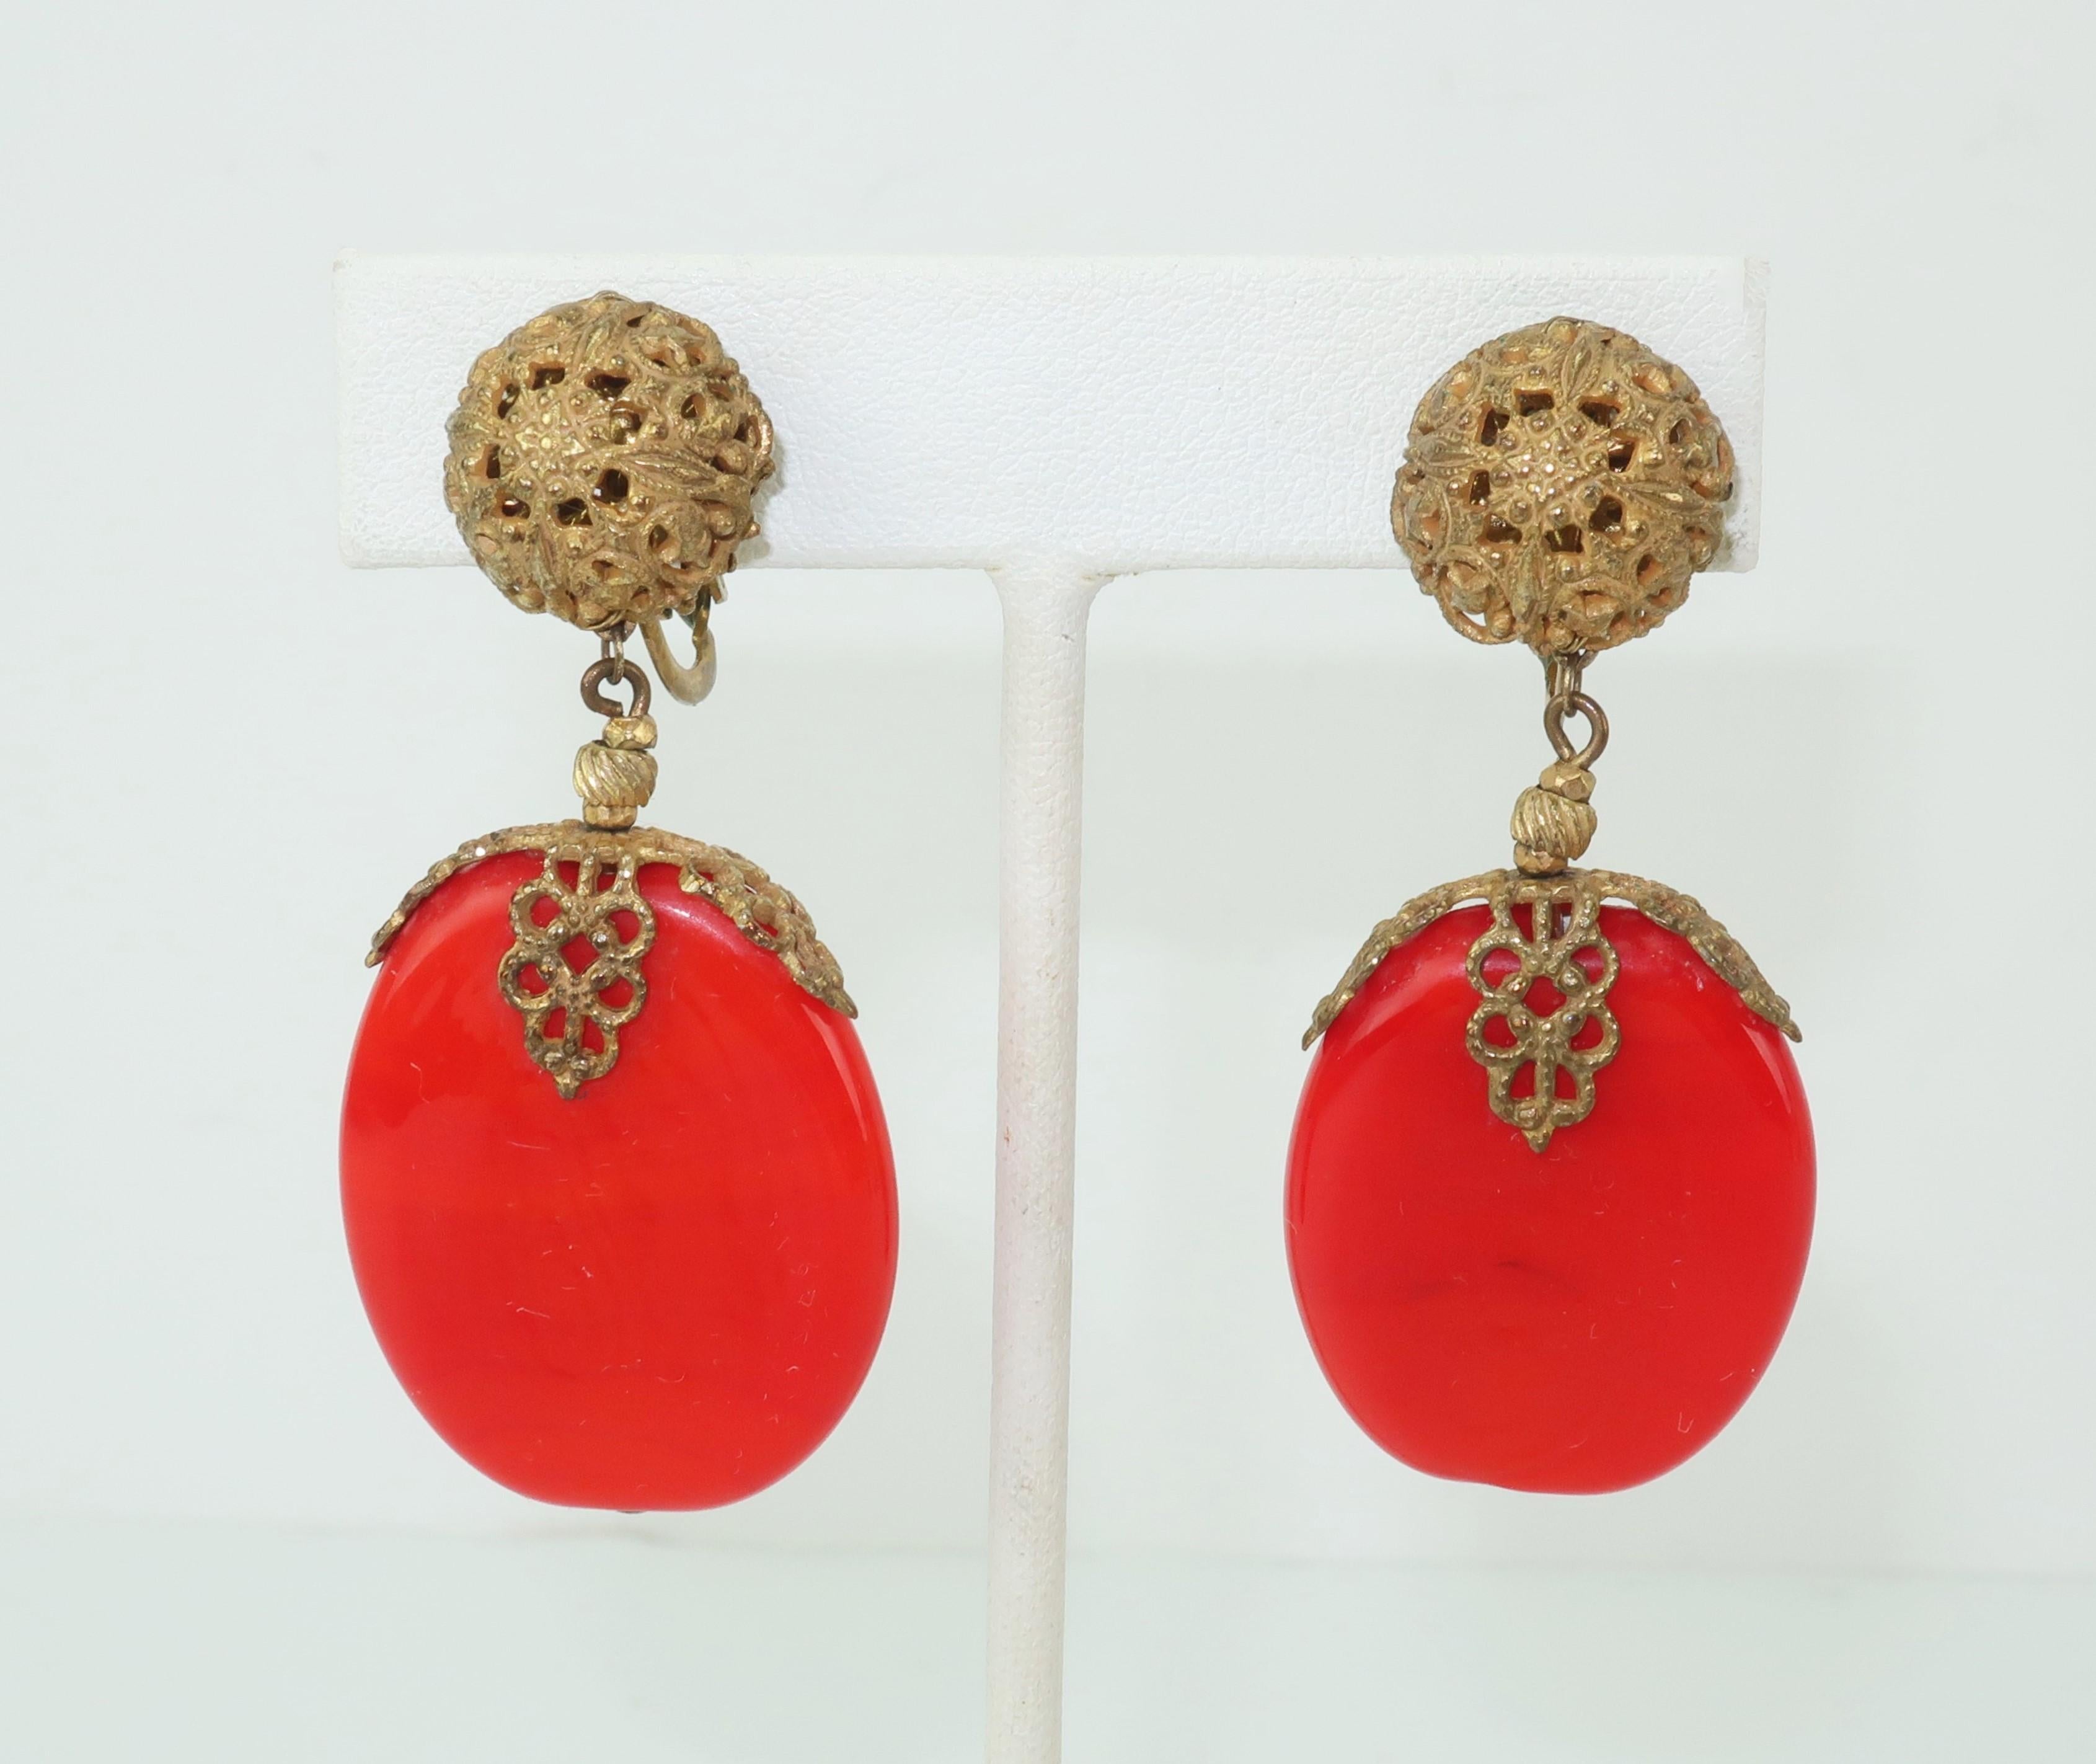 This 1950's Miriam Haskell demi parure, consisting of a brooch and dangle earrings, is reminiscent of 1920's Art Deco jewelry with an exotic aesthetic...imagine opium den chic and you have the picture.  The set is created from a fiery red glass